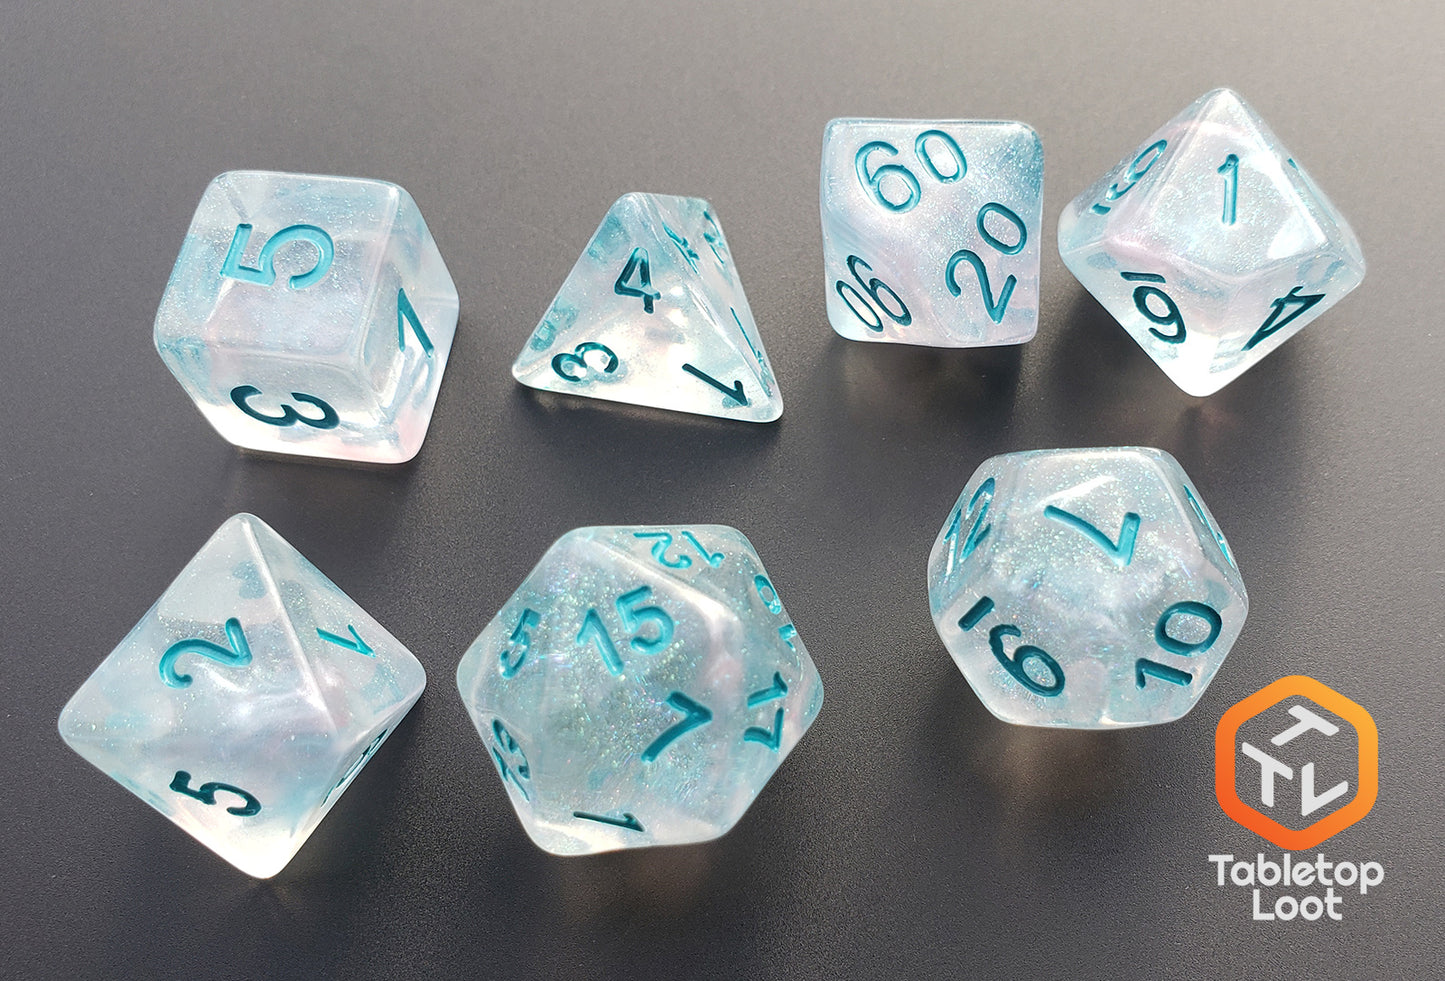 The Wall of Ice 7 piece dice set from Tabletop Loot with tons of glitter in a translucent resin with teal numbering.